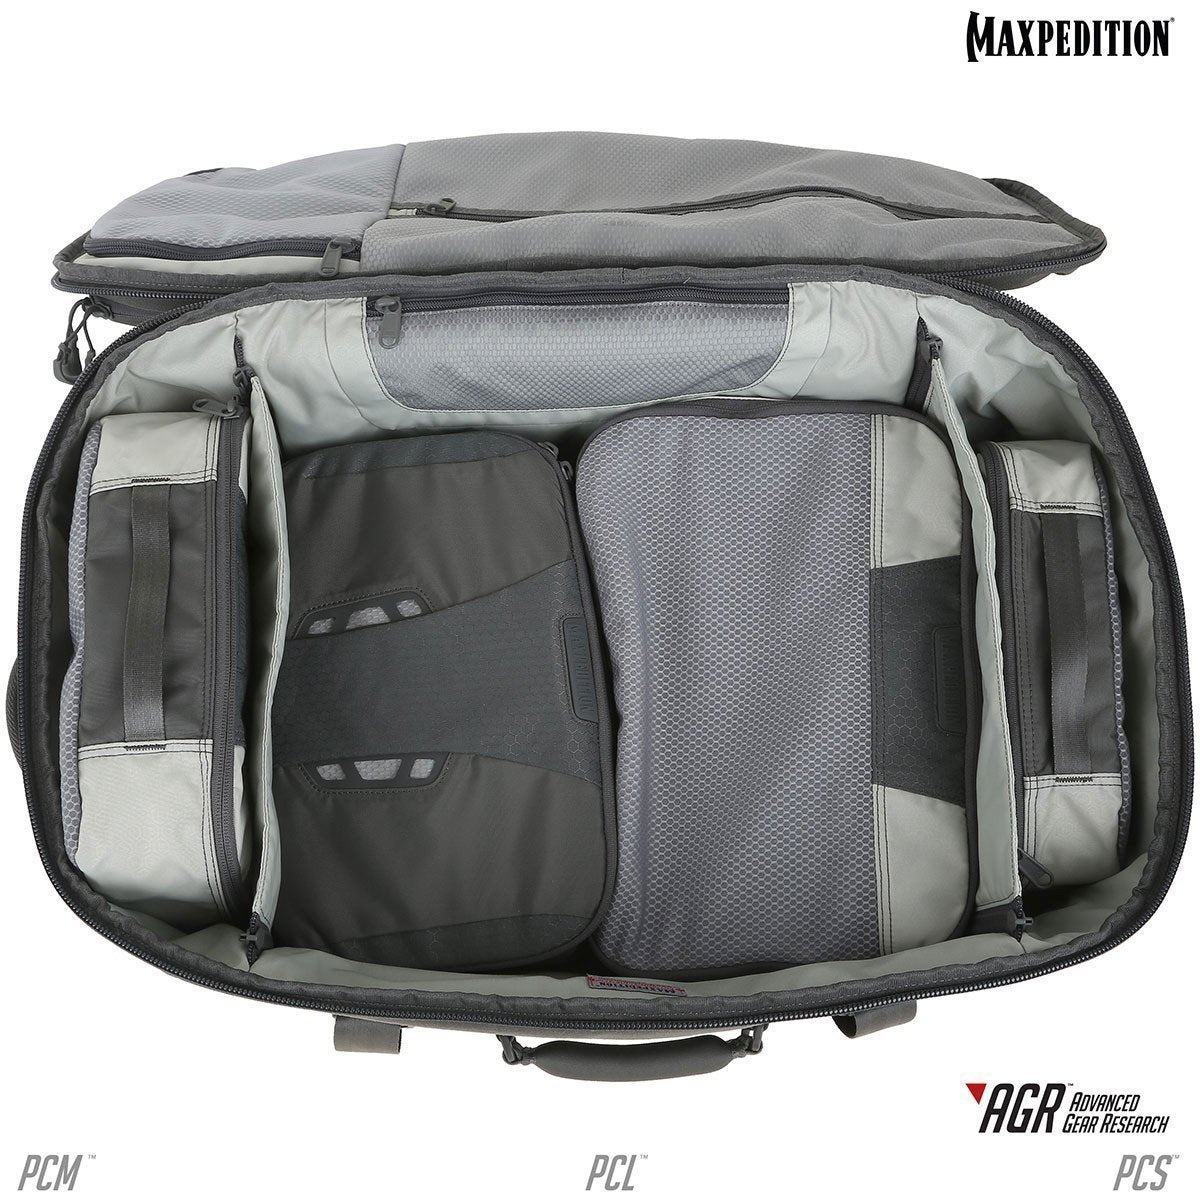 PCS™ Packing Cube Small | Maxpedition Tactical Gear